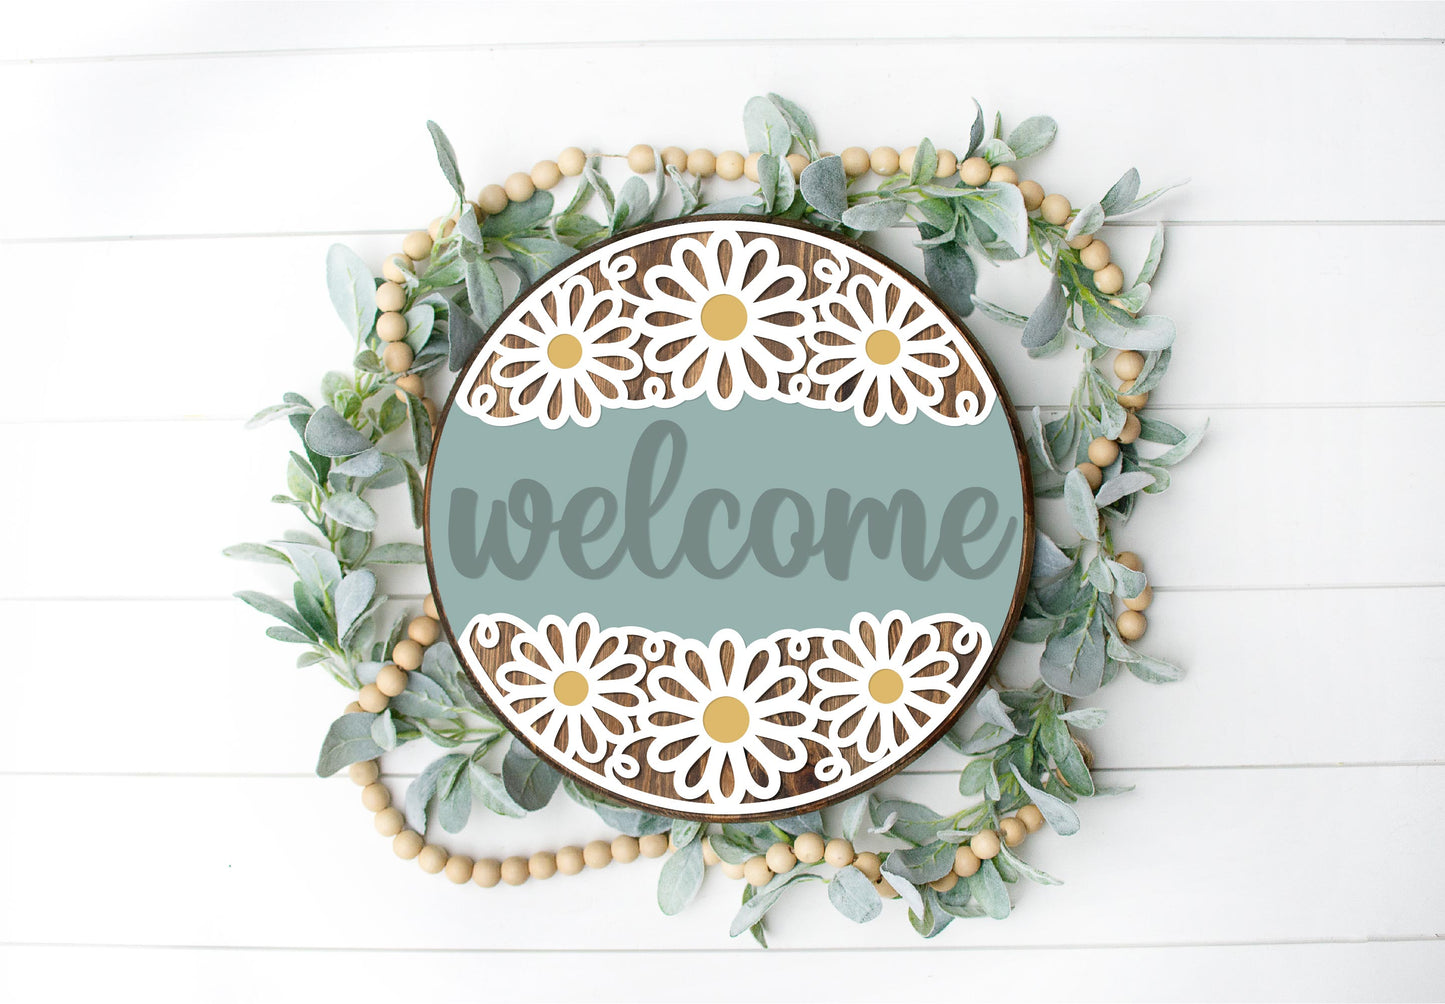 Daisy chain Welcome sign